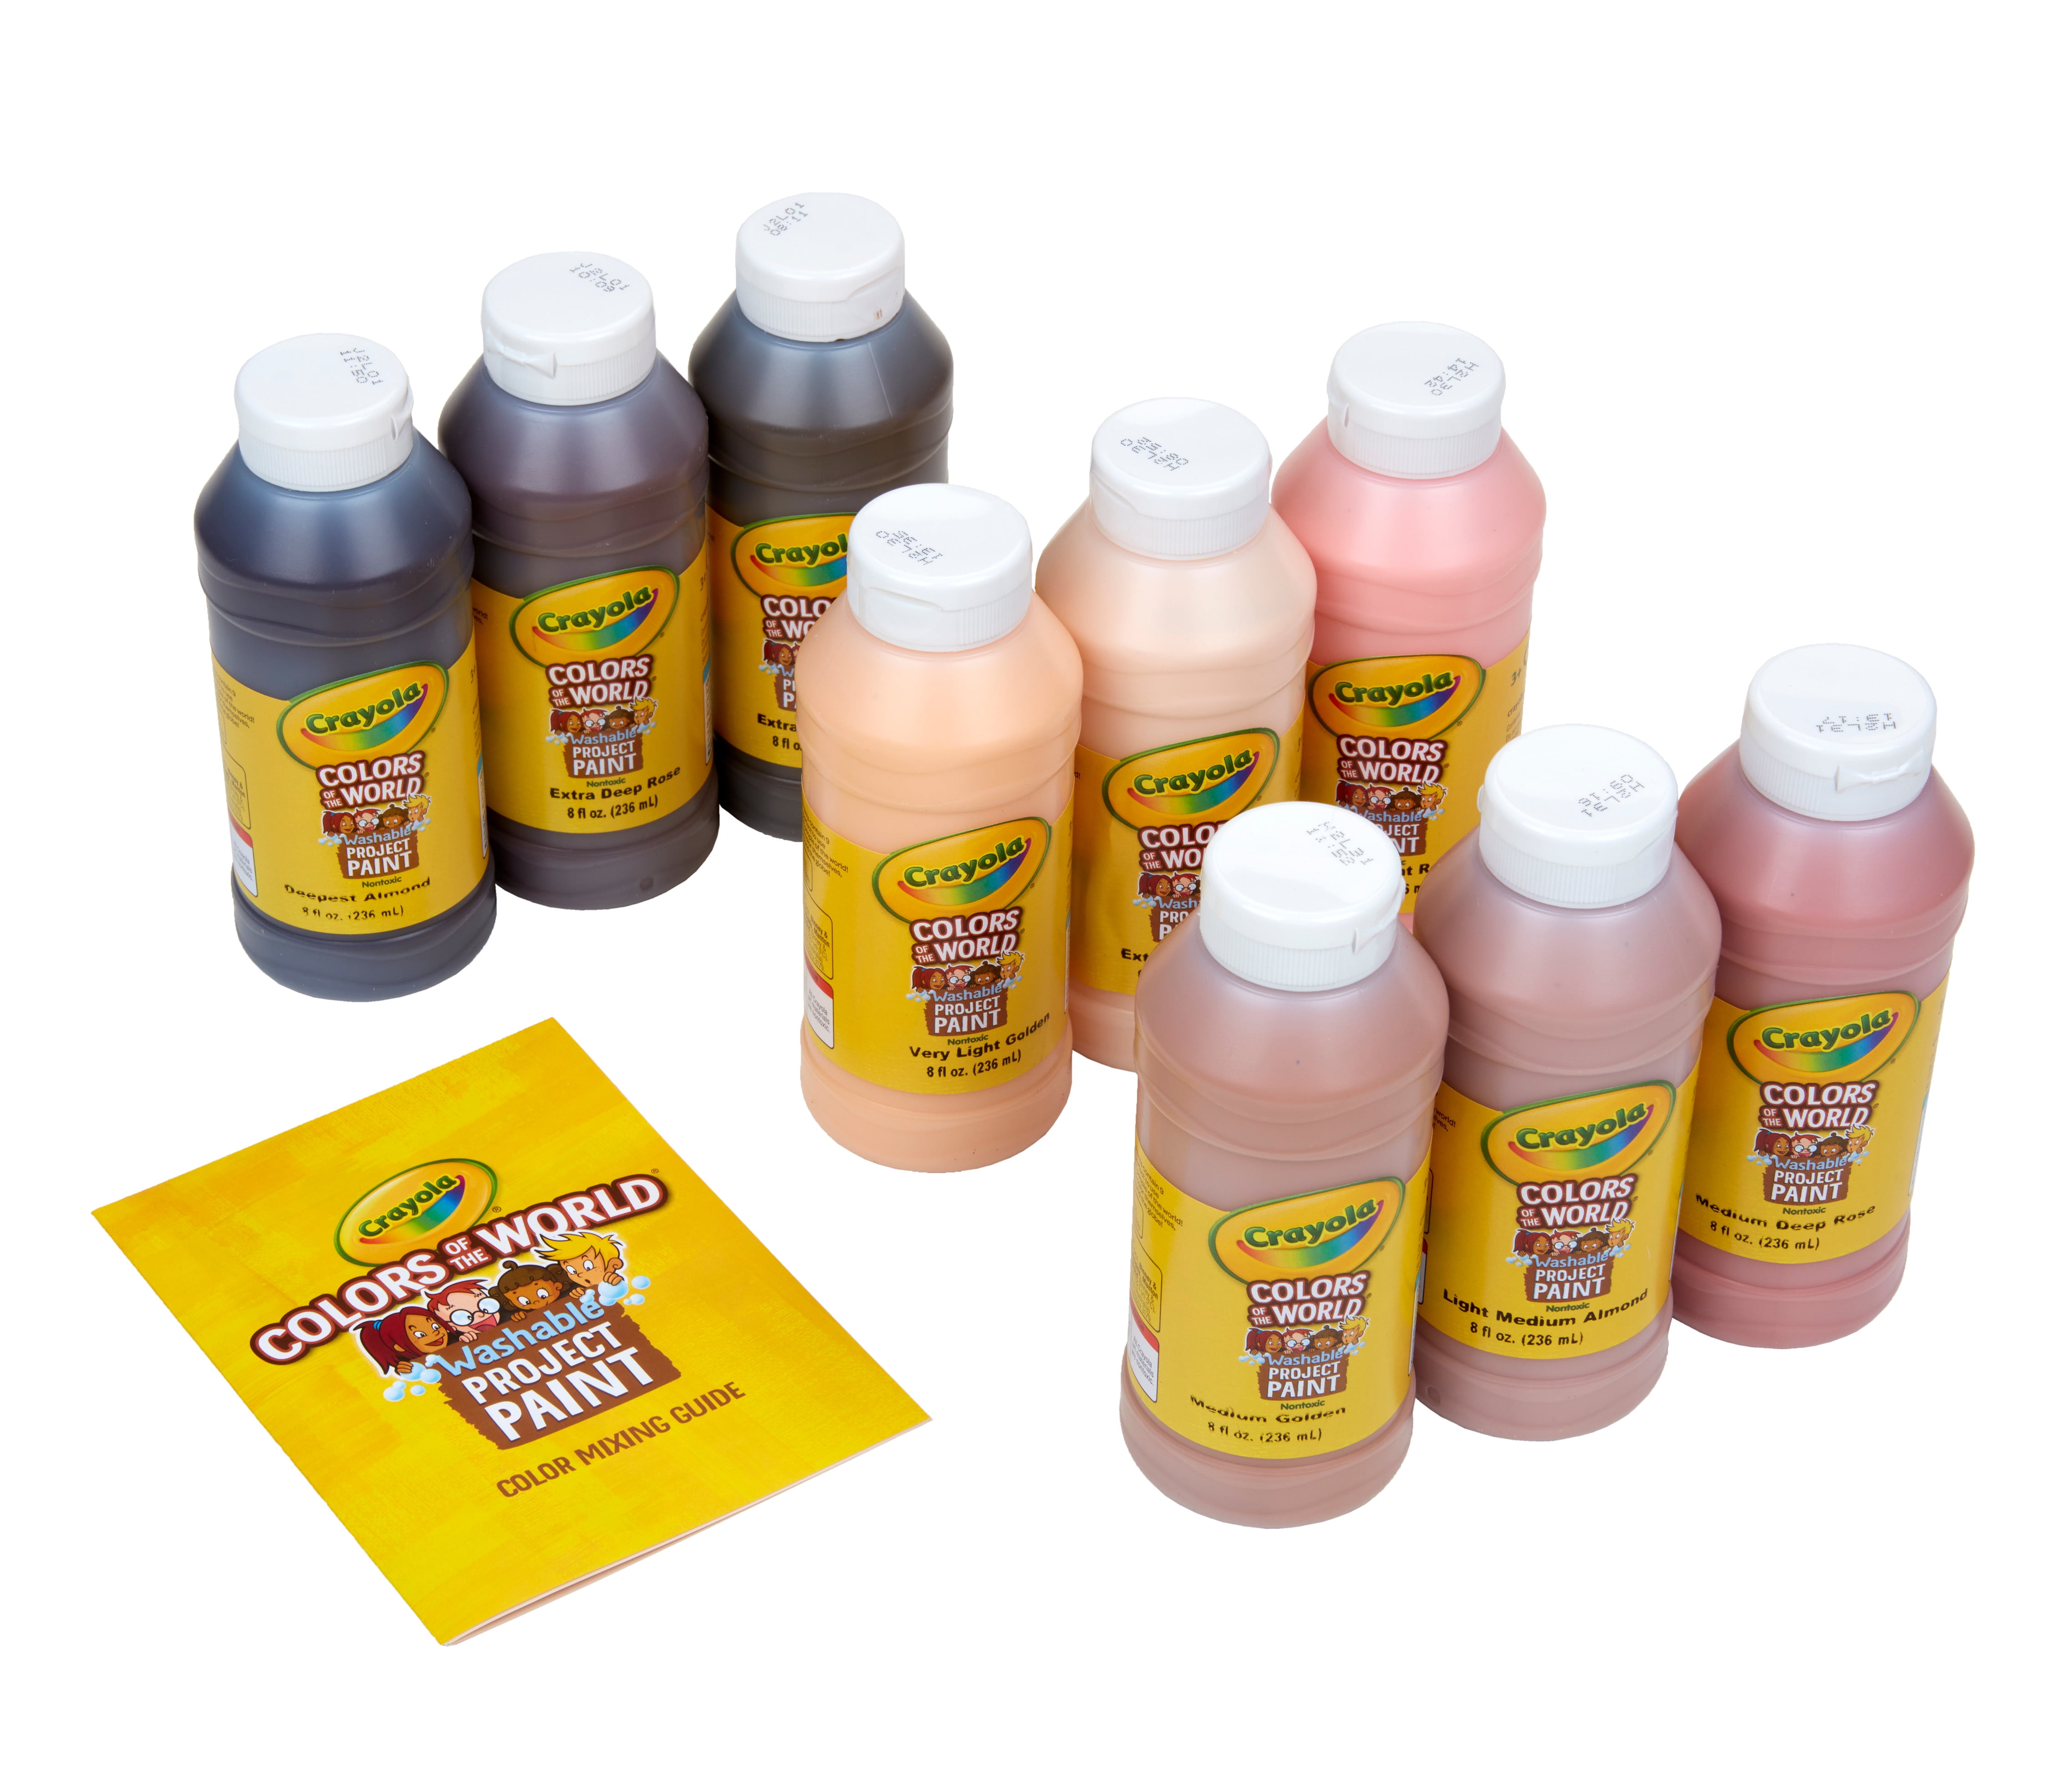 Crayola Colors of the World Washable Project Paint - Set of 9 colors, 8 oz  Bottles